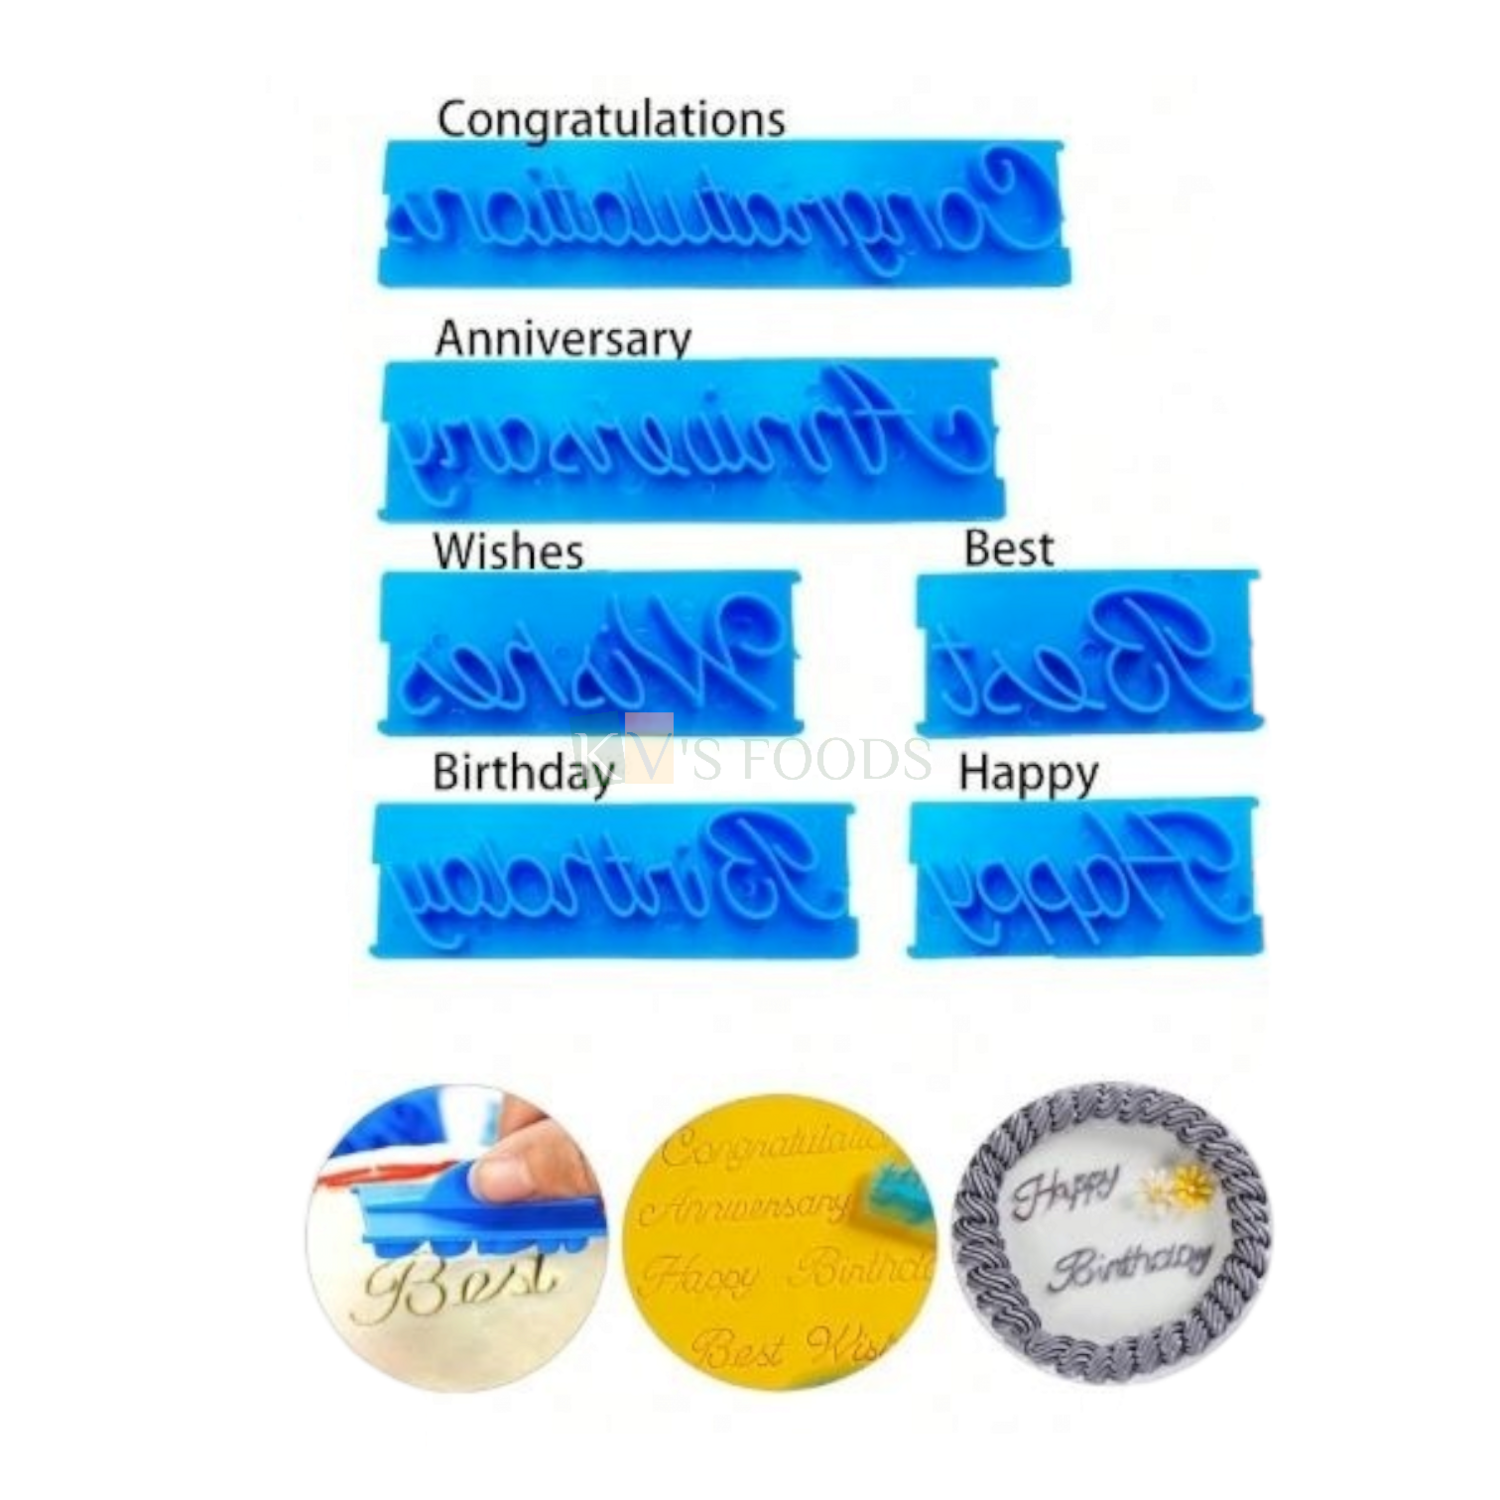 6 PCS Blue Congratulations Happy Birthday Best Wishes Anniversary Word Fondant Stamps Cutters Molds Chocolates Plungers Birthday Party, Wedding Anniversary Cake Decorations